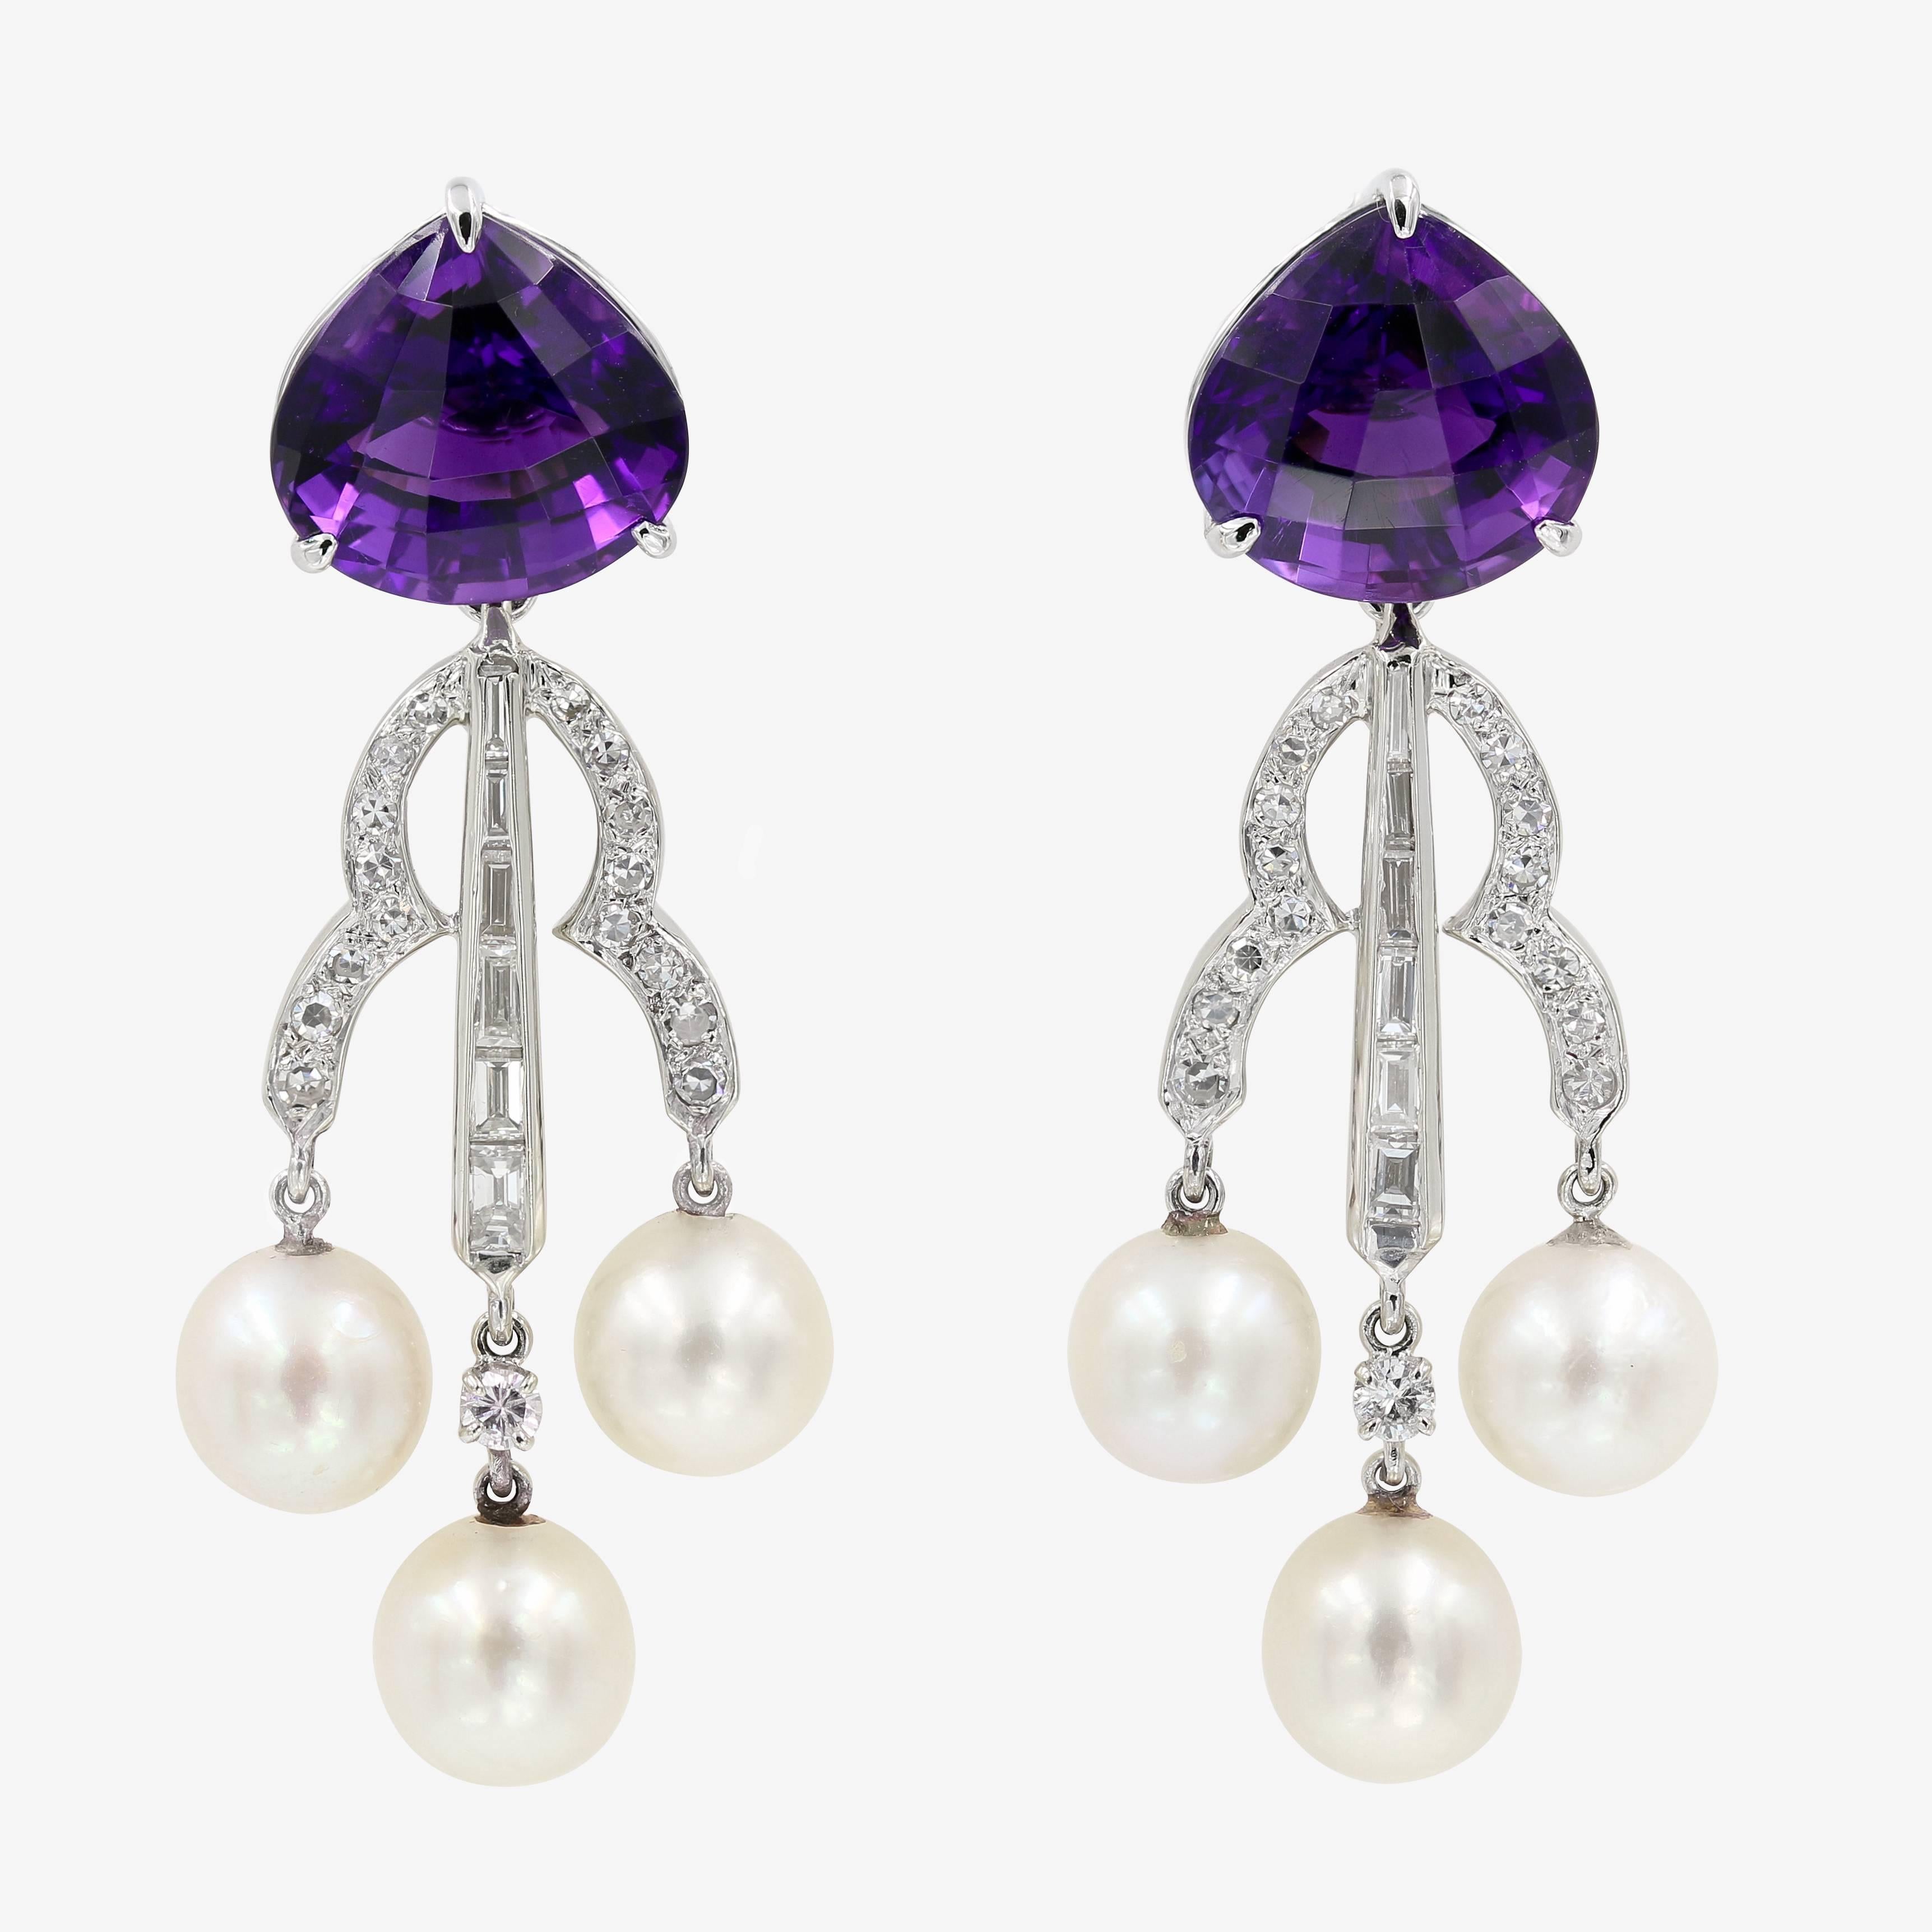 These unique earrings in 14kt. white gold contain 2 matched fancy cut amethysts=15.25cts. t.w. and are accented by 32 single cut round diamonds approximately .50ct. t.w. (G in color and VS in clarity), 2 round diamonds approximately .14ct. t.w. (G